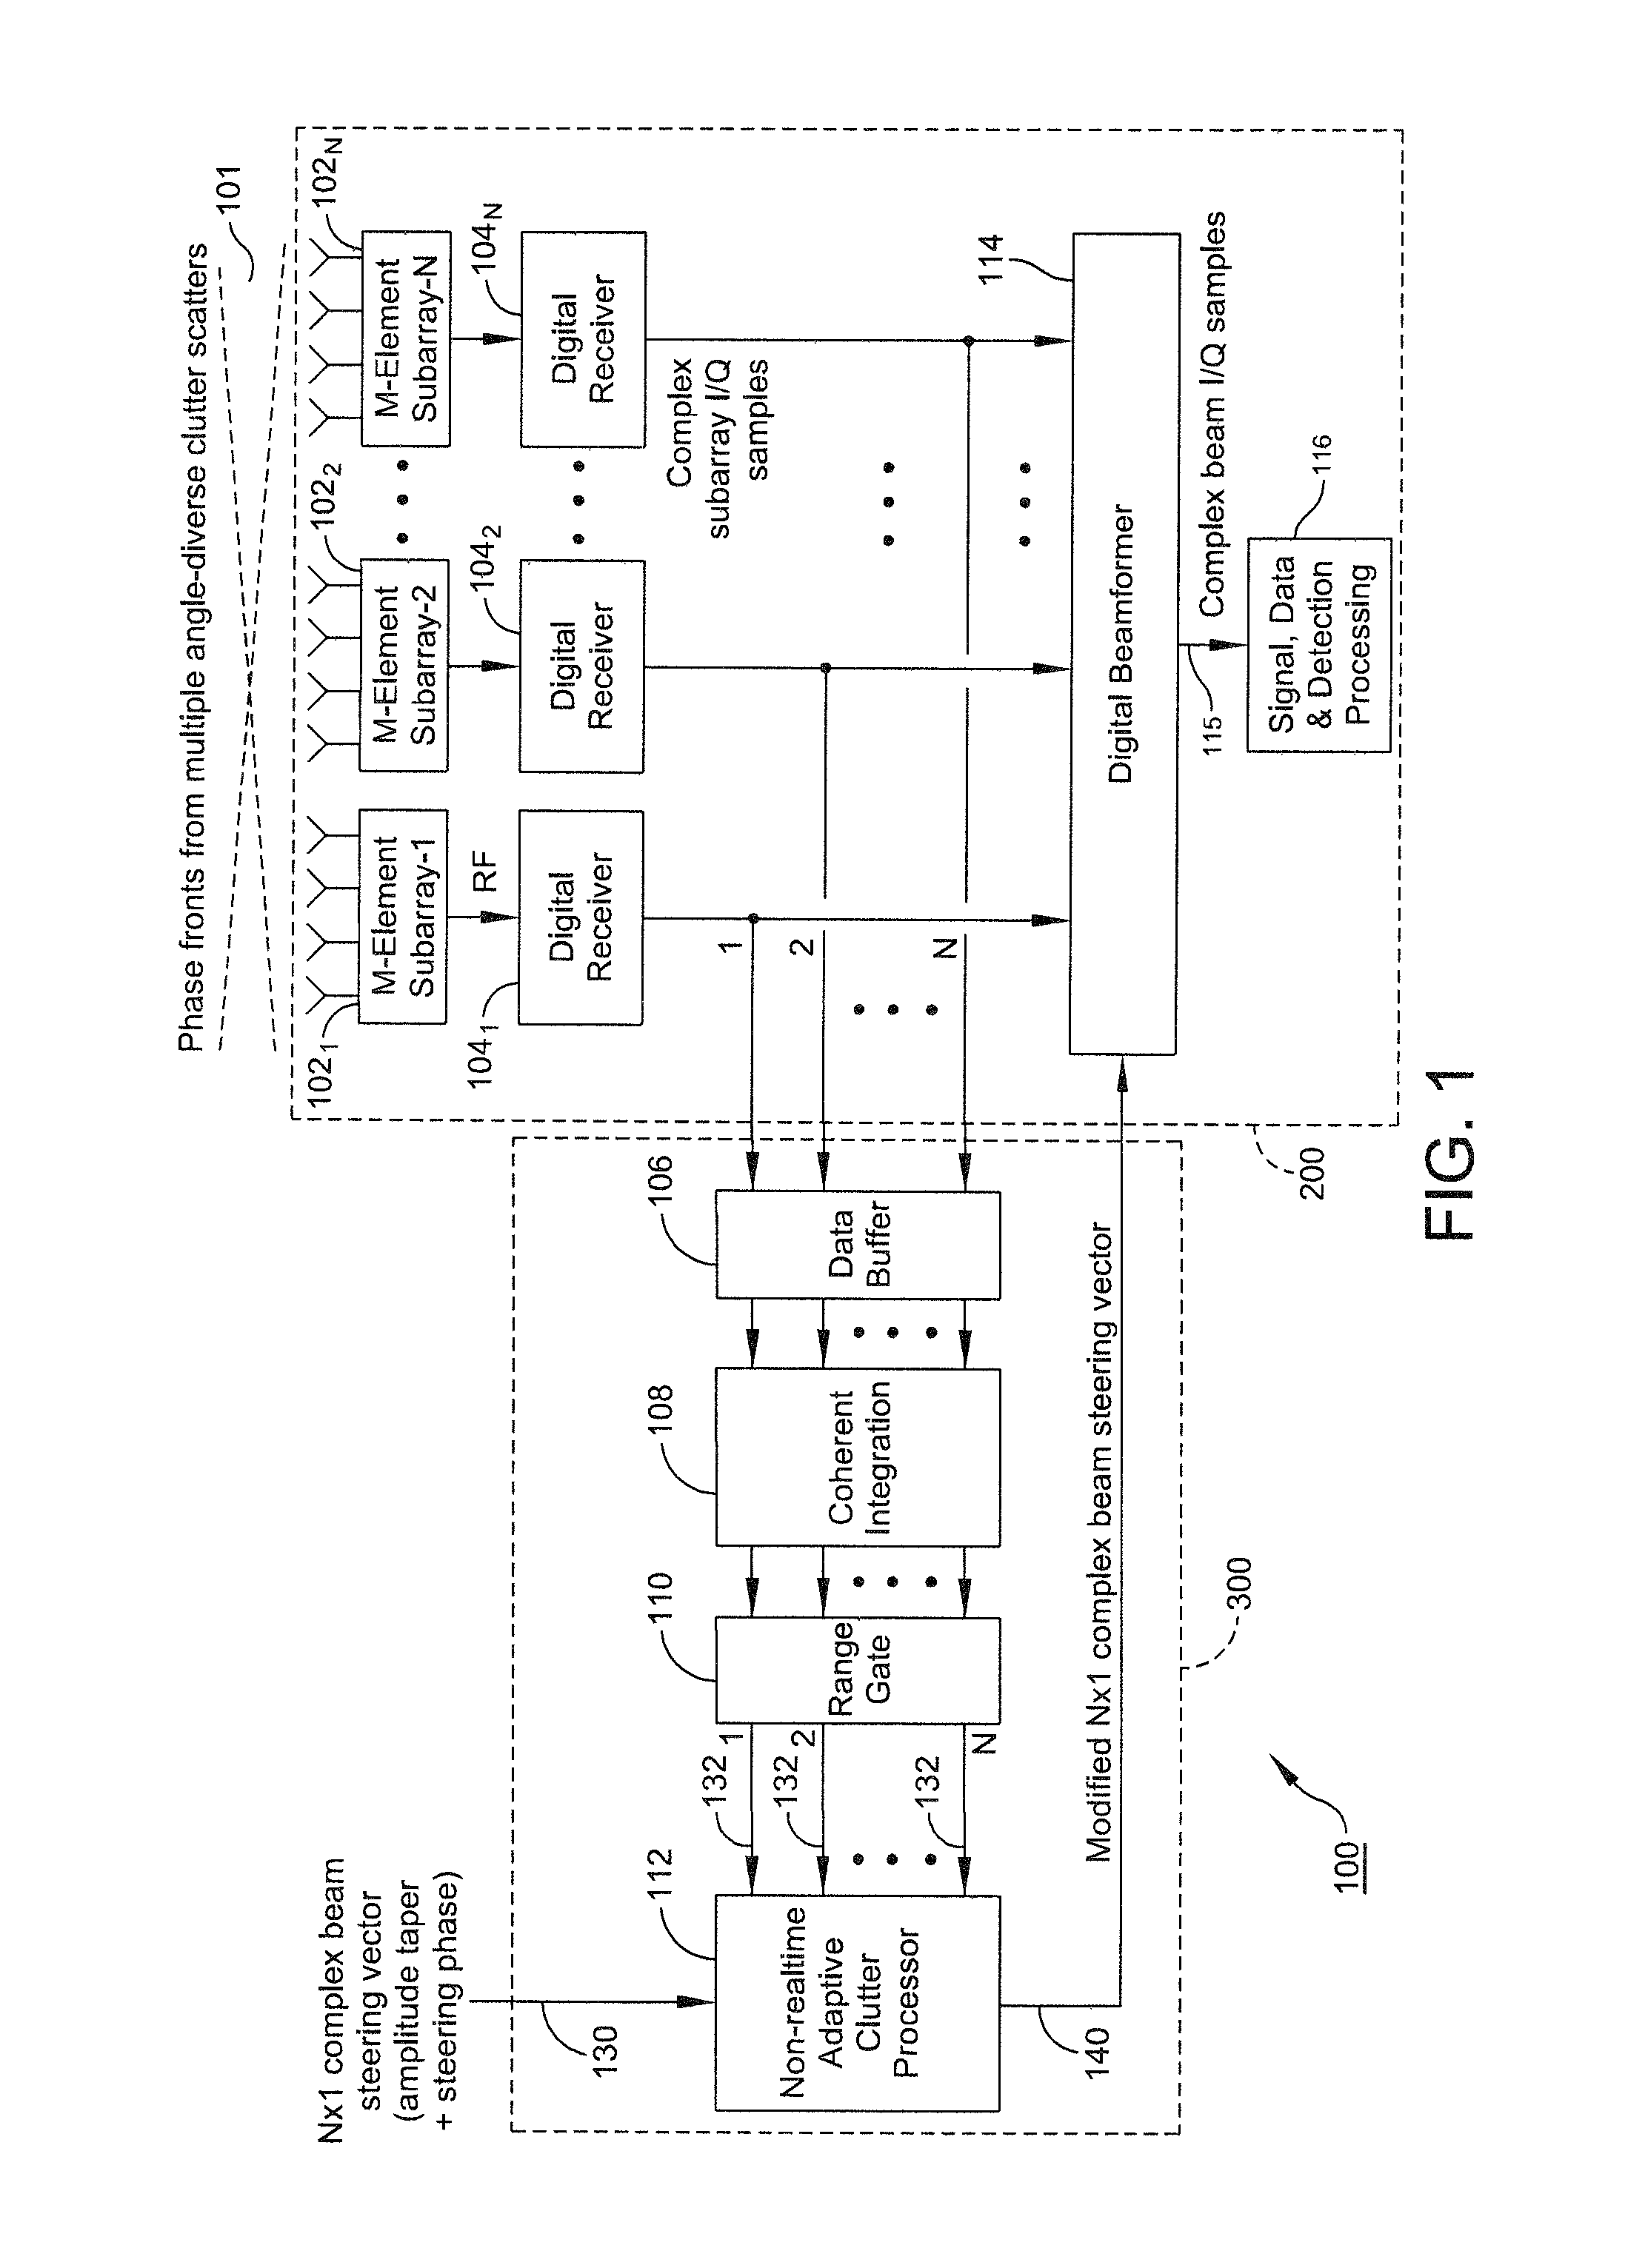 Method and system for adaptively cancelling clutter from the sidelobes of a ground-based radar